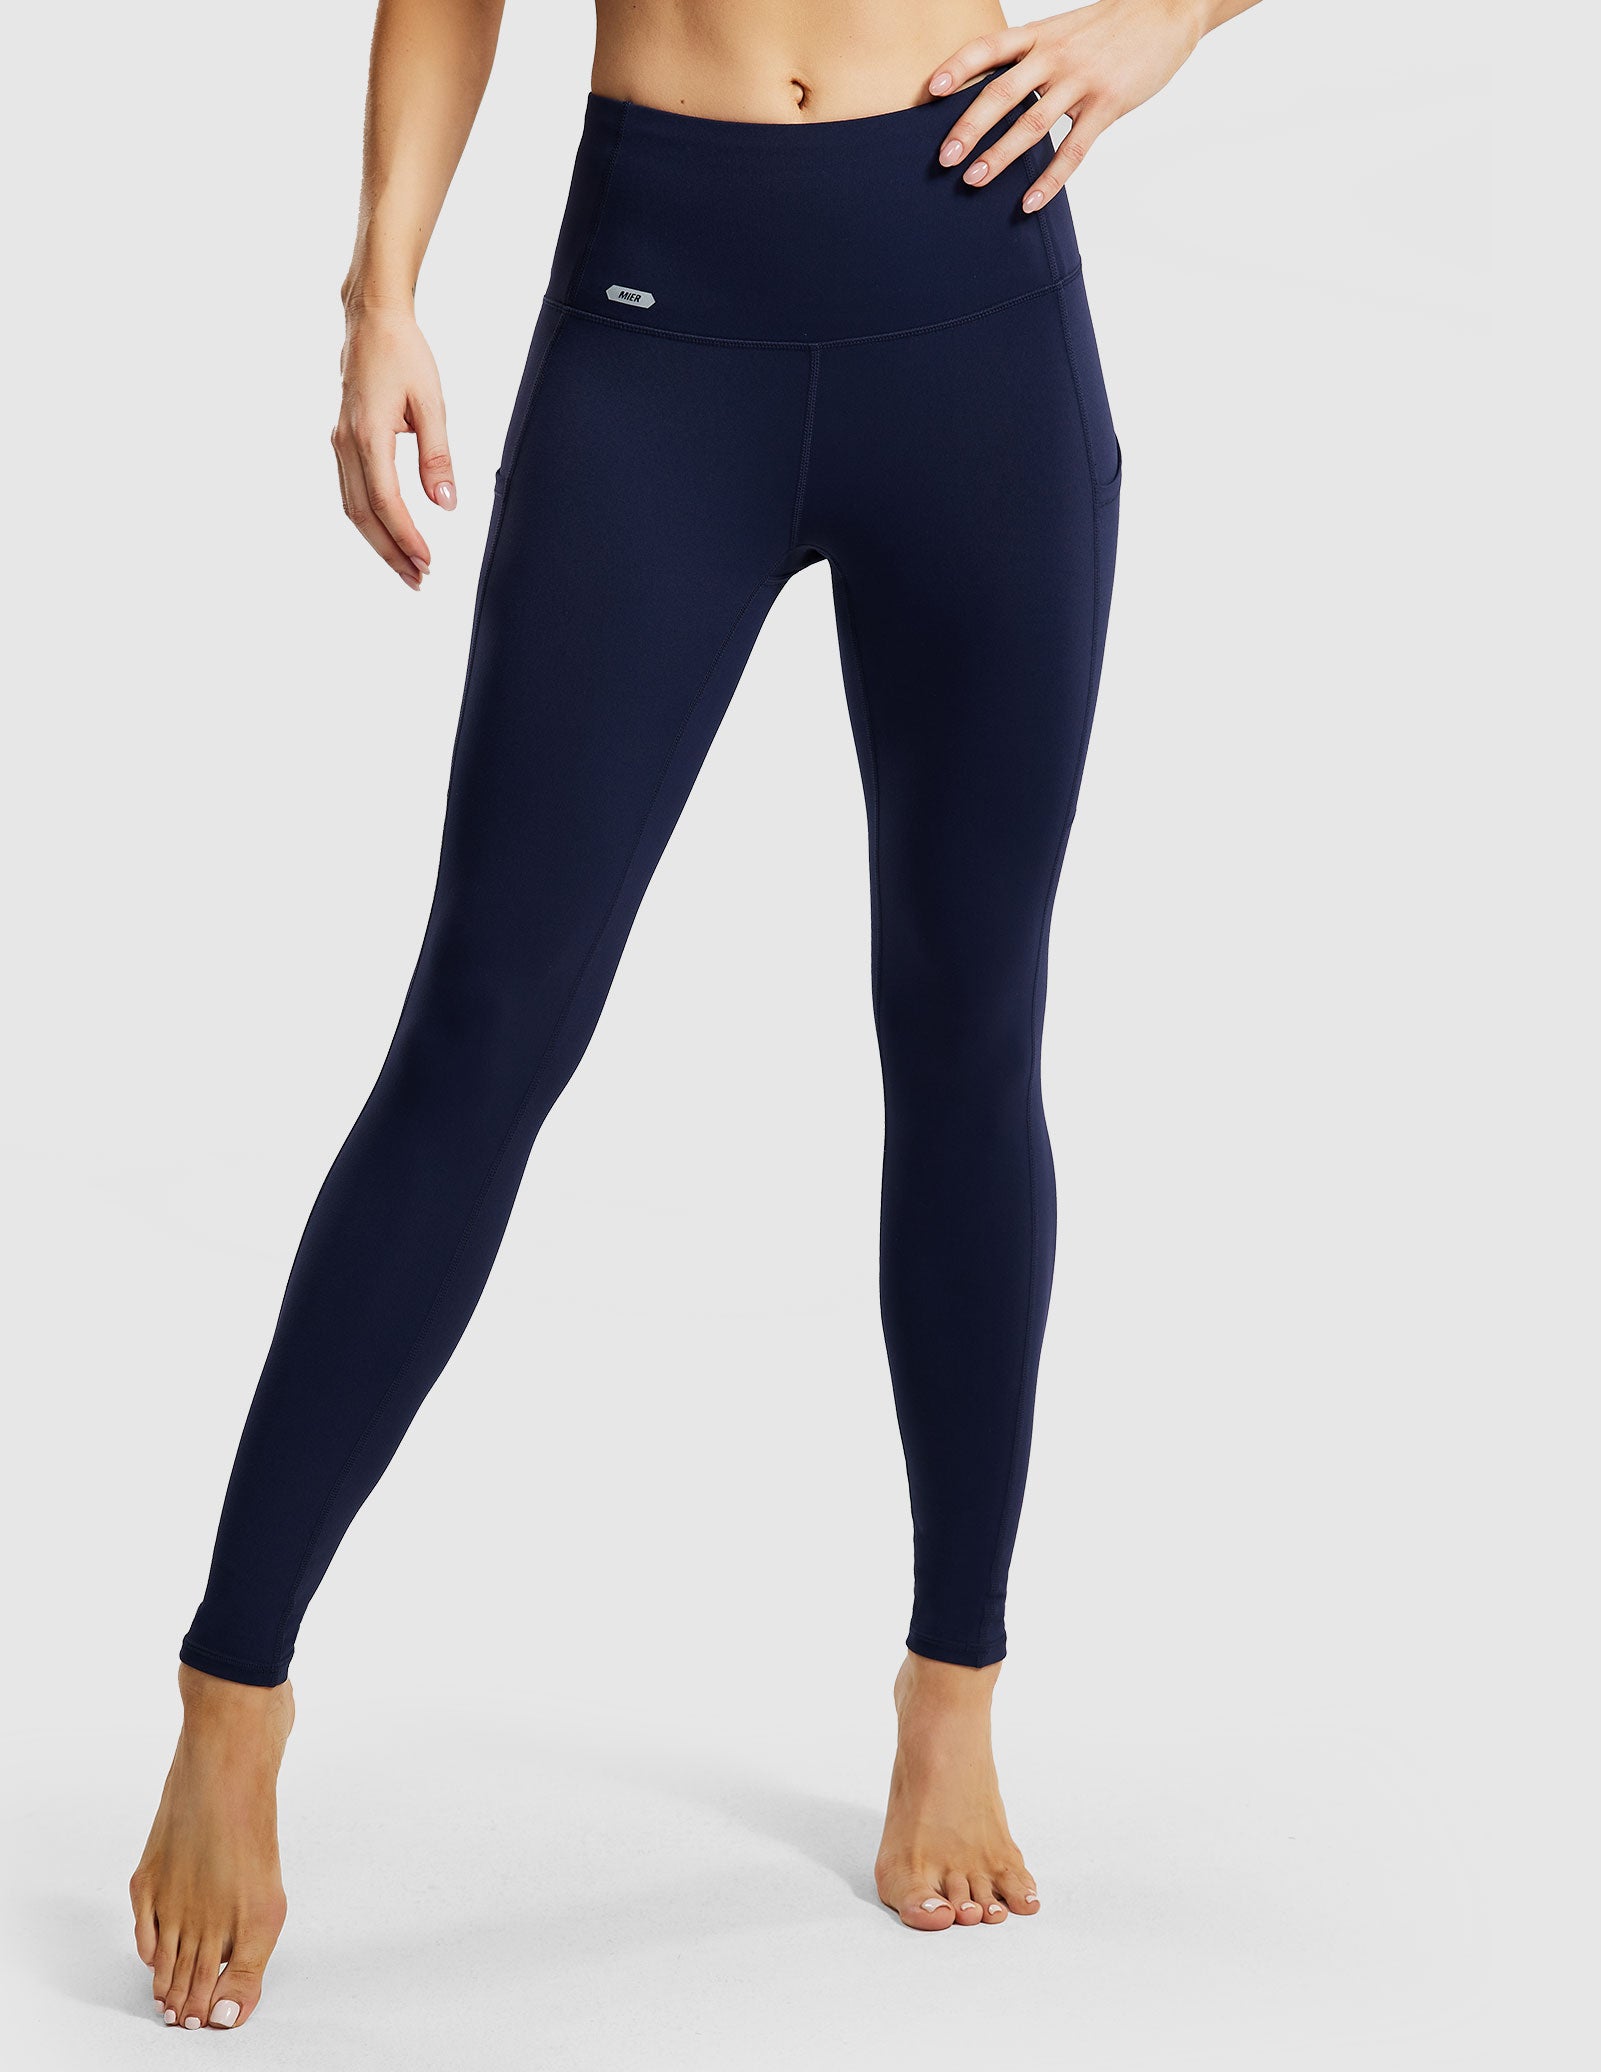 All-in-1 Leggings  High Waisted, Squat Proof Leggings WITH POCKETS 📱 